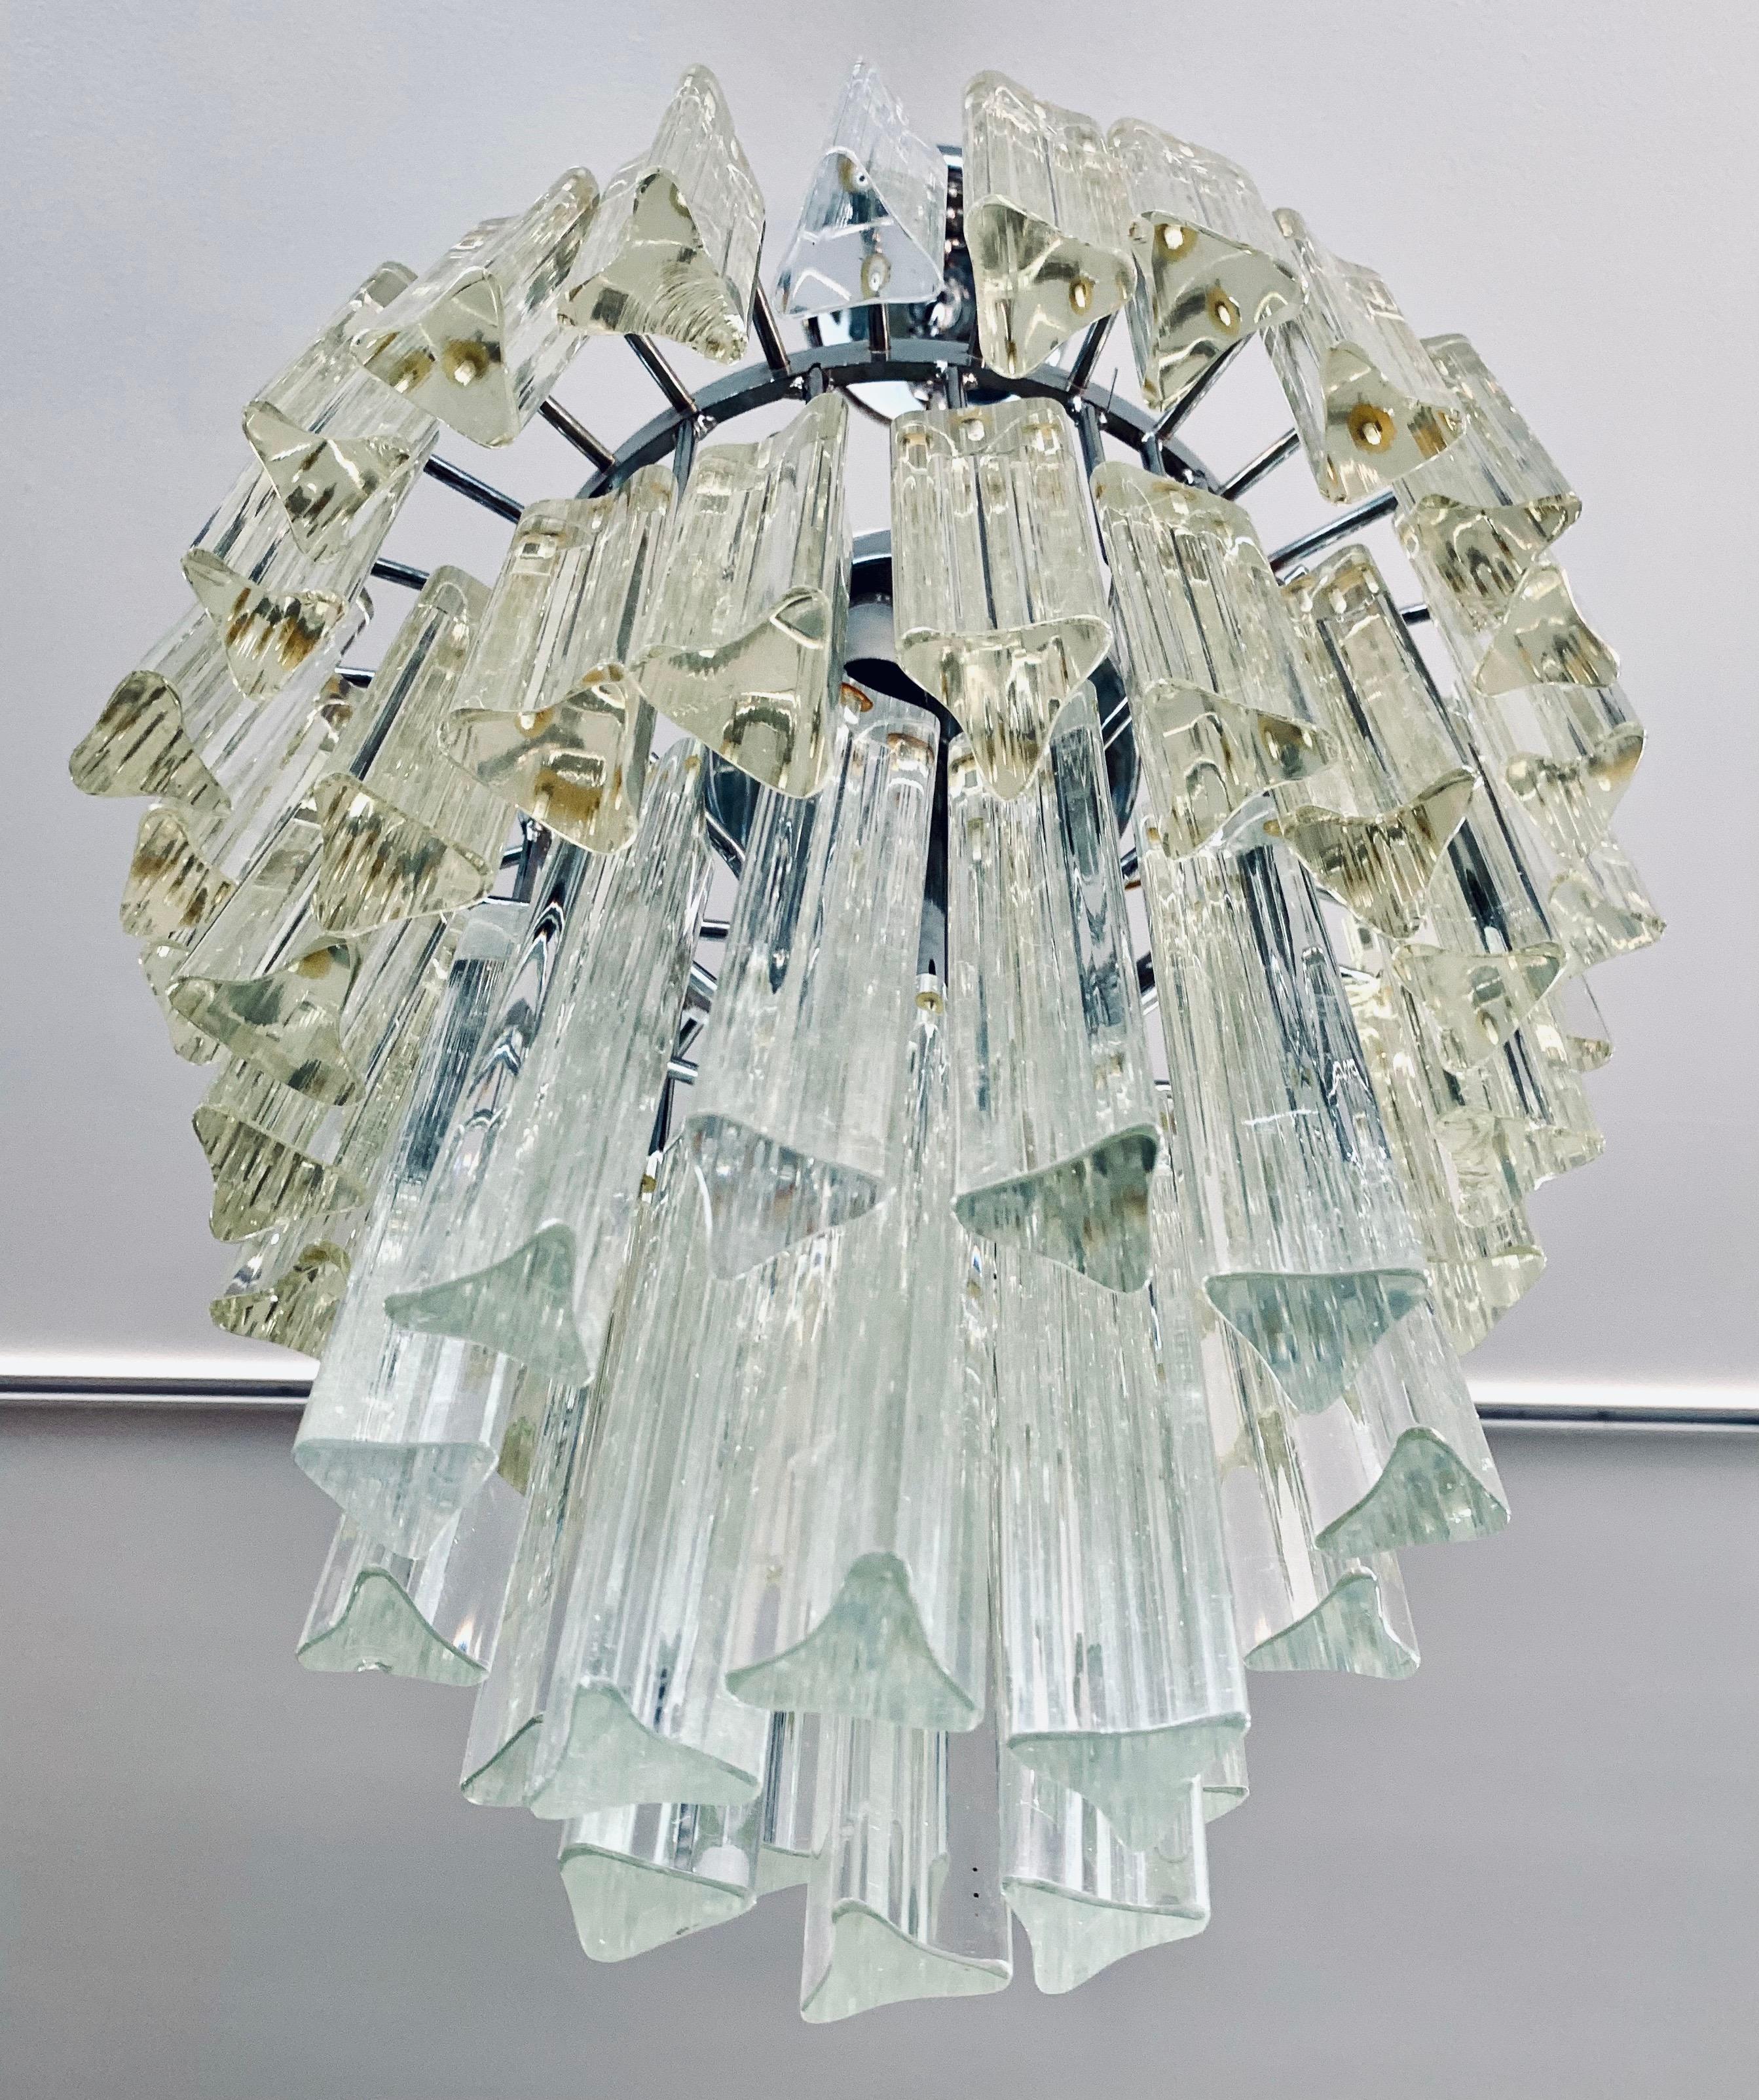 Magnificent camer glass murano wedding cake chandelier with all prisms intact. Four levels of prisms, all measuring 4.5